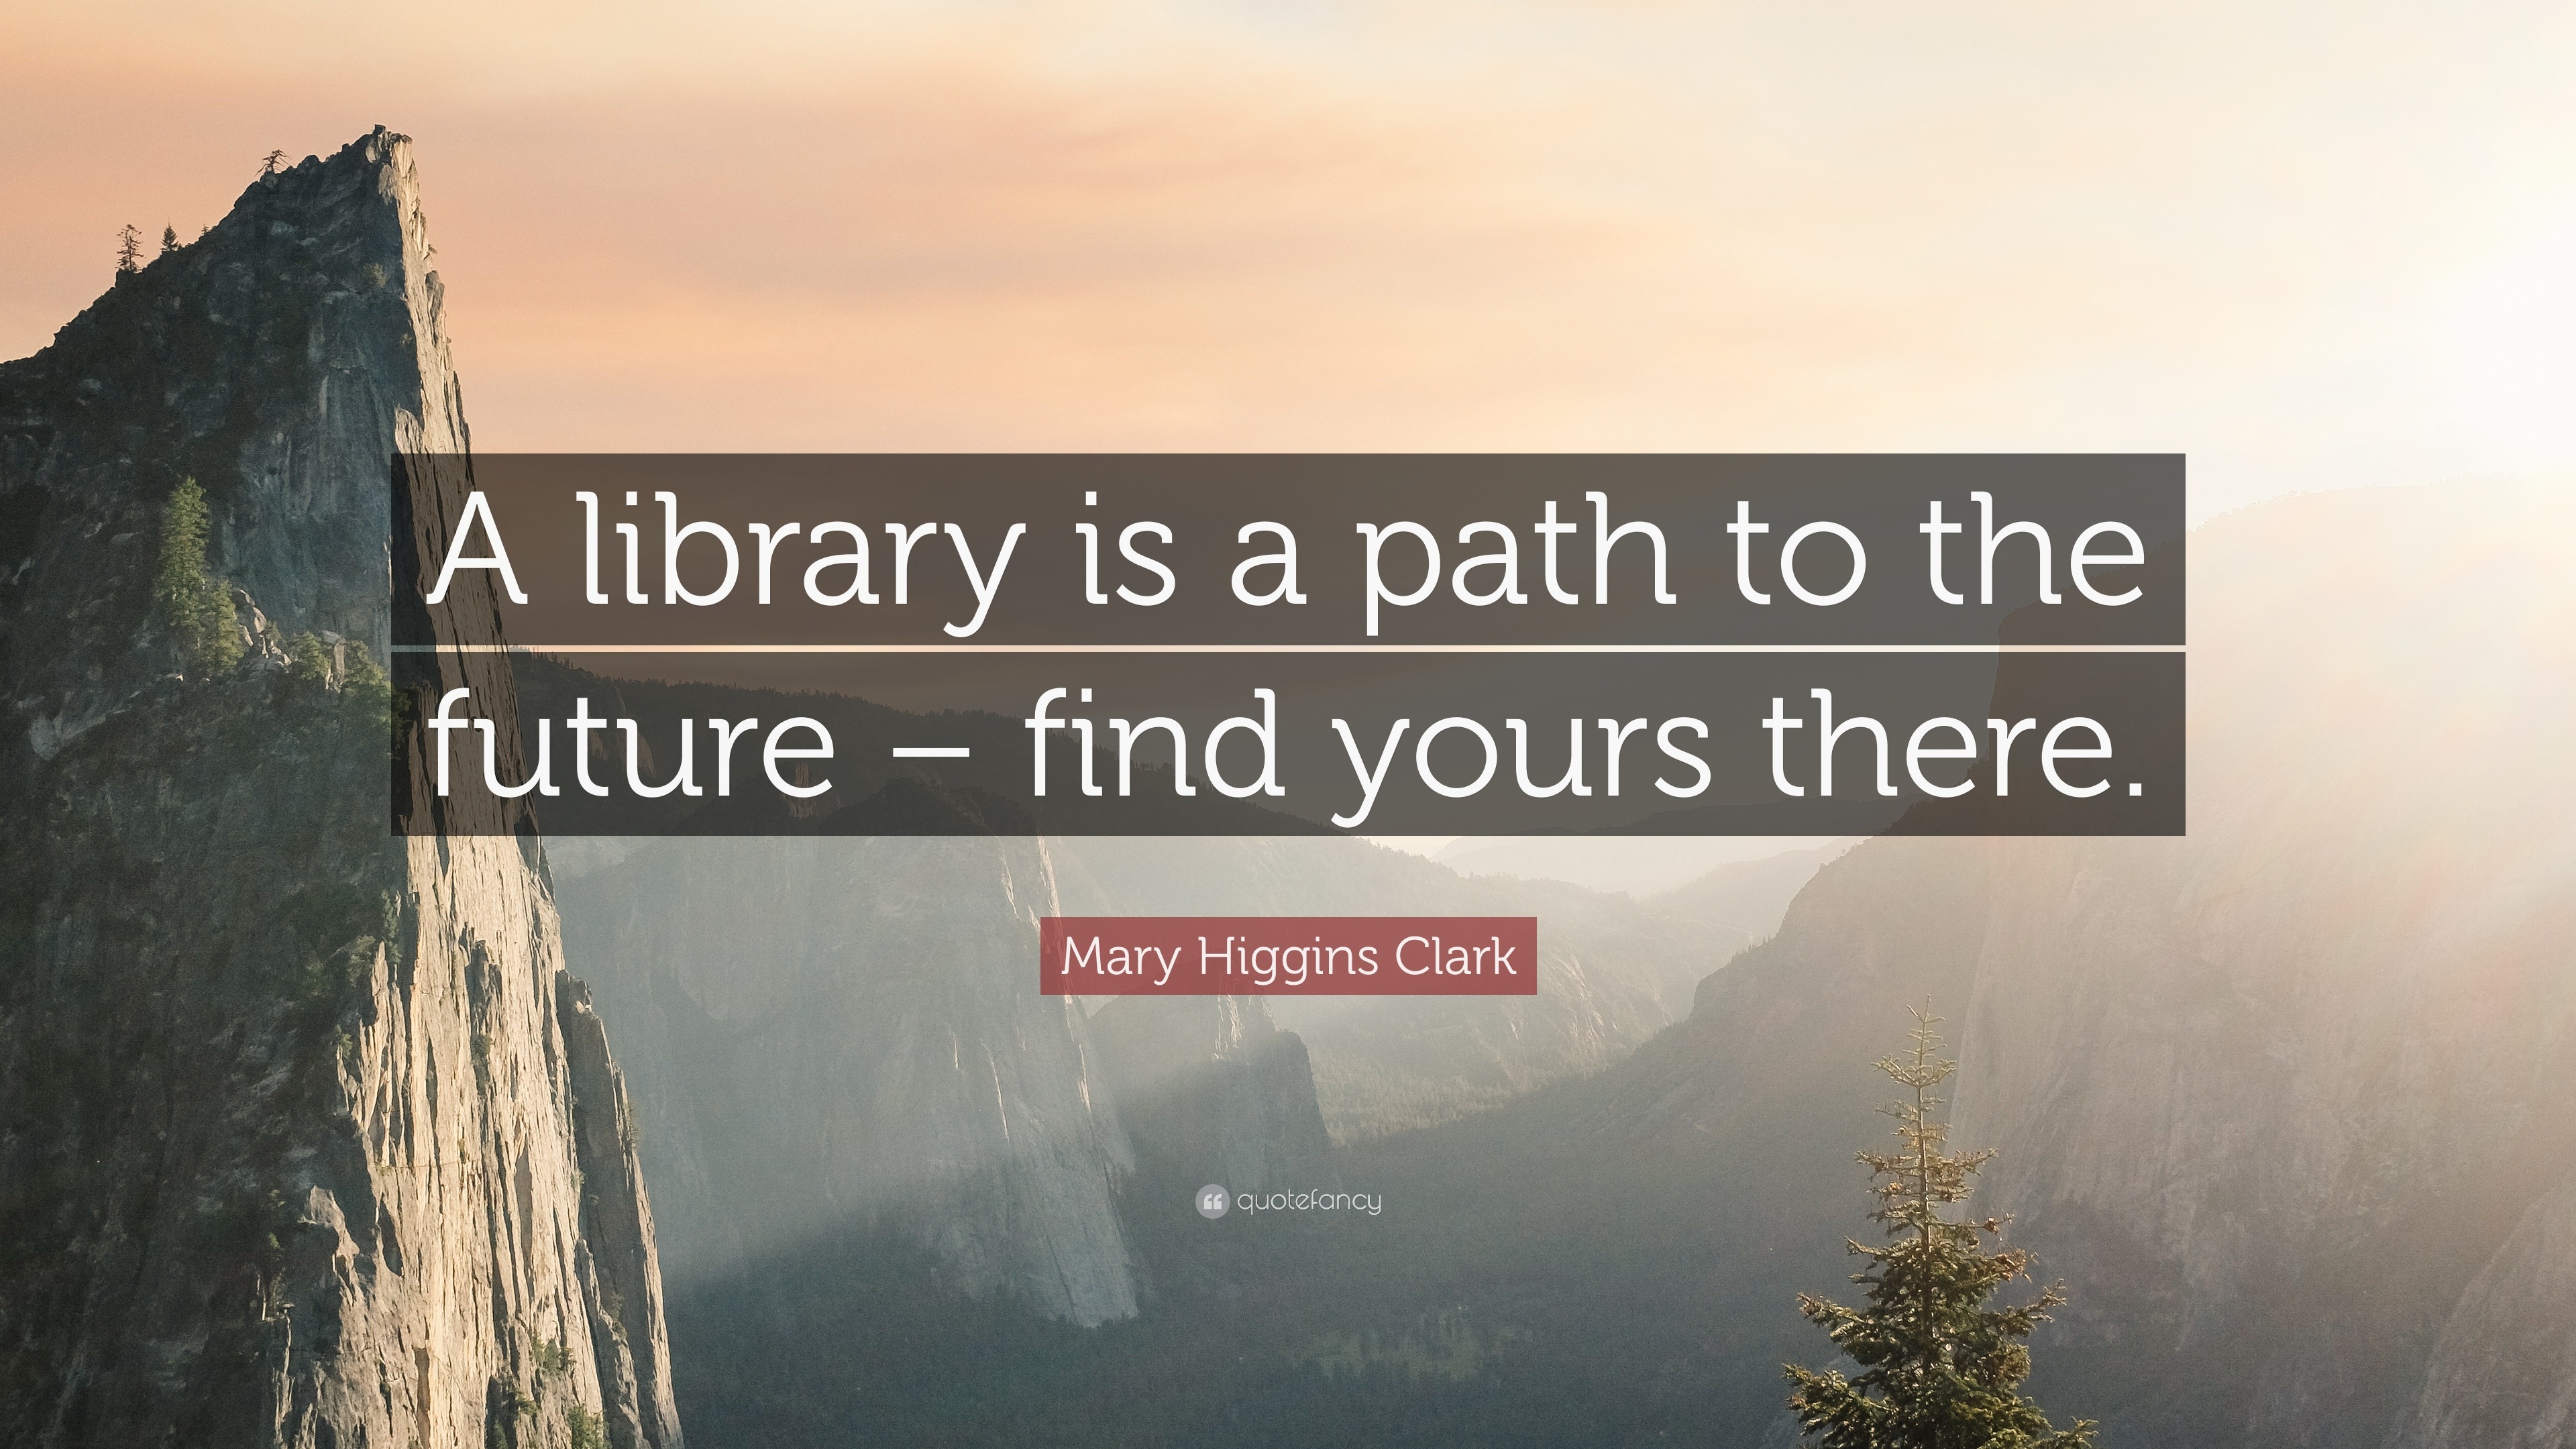 Mary Higgins Clark Quote: “A library is a path to the future – find yours there ...3840 x 2160